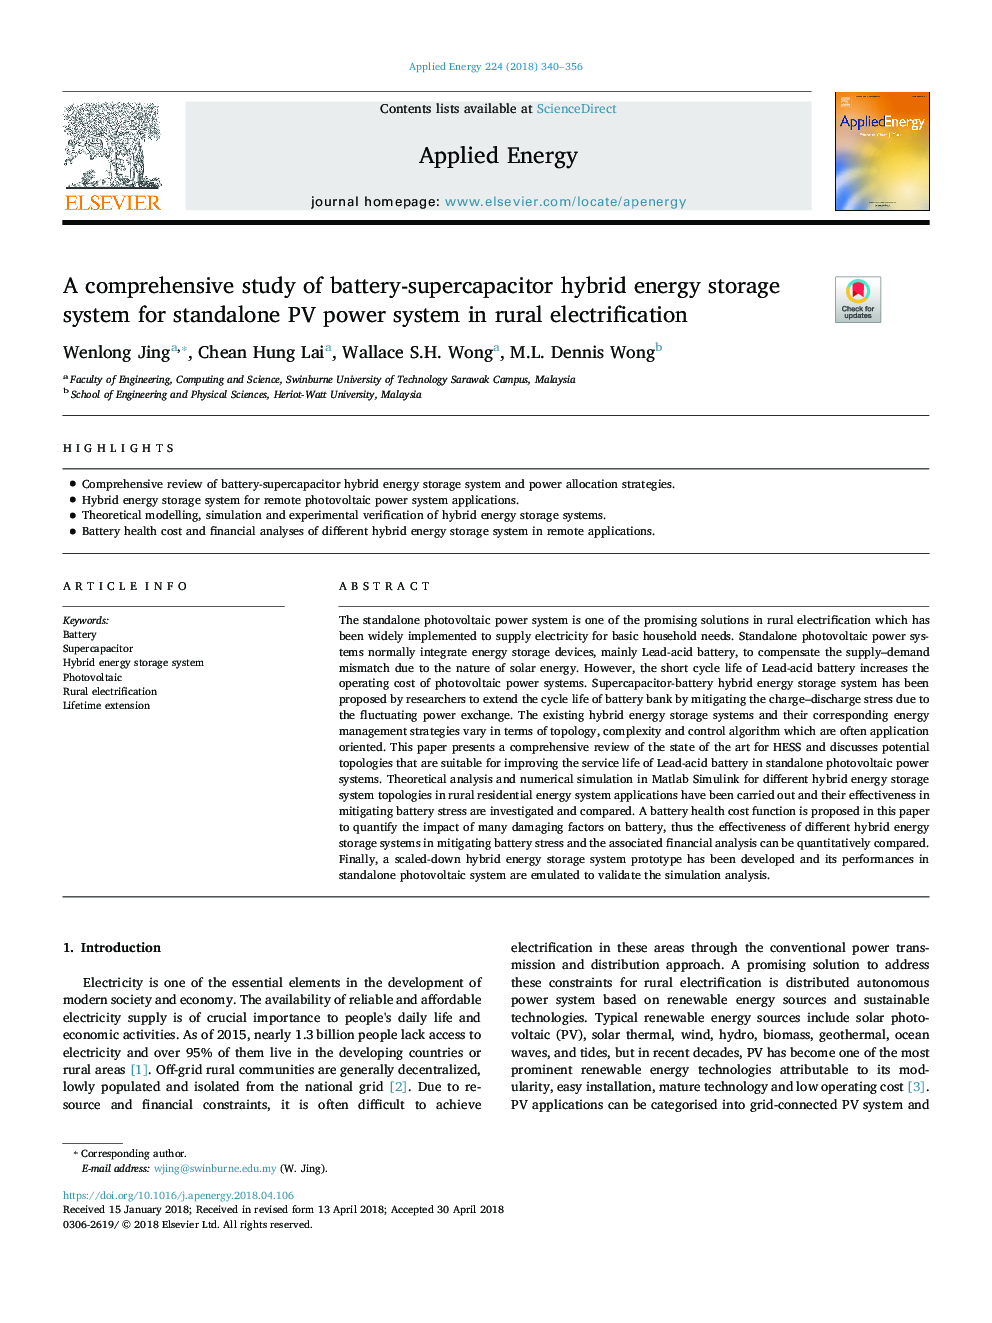 A comprehensive study of battery-supercapacitor hybrid energy storage system for standalone PV power system in rural electrification